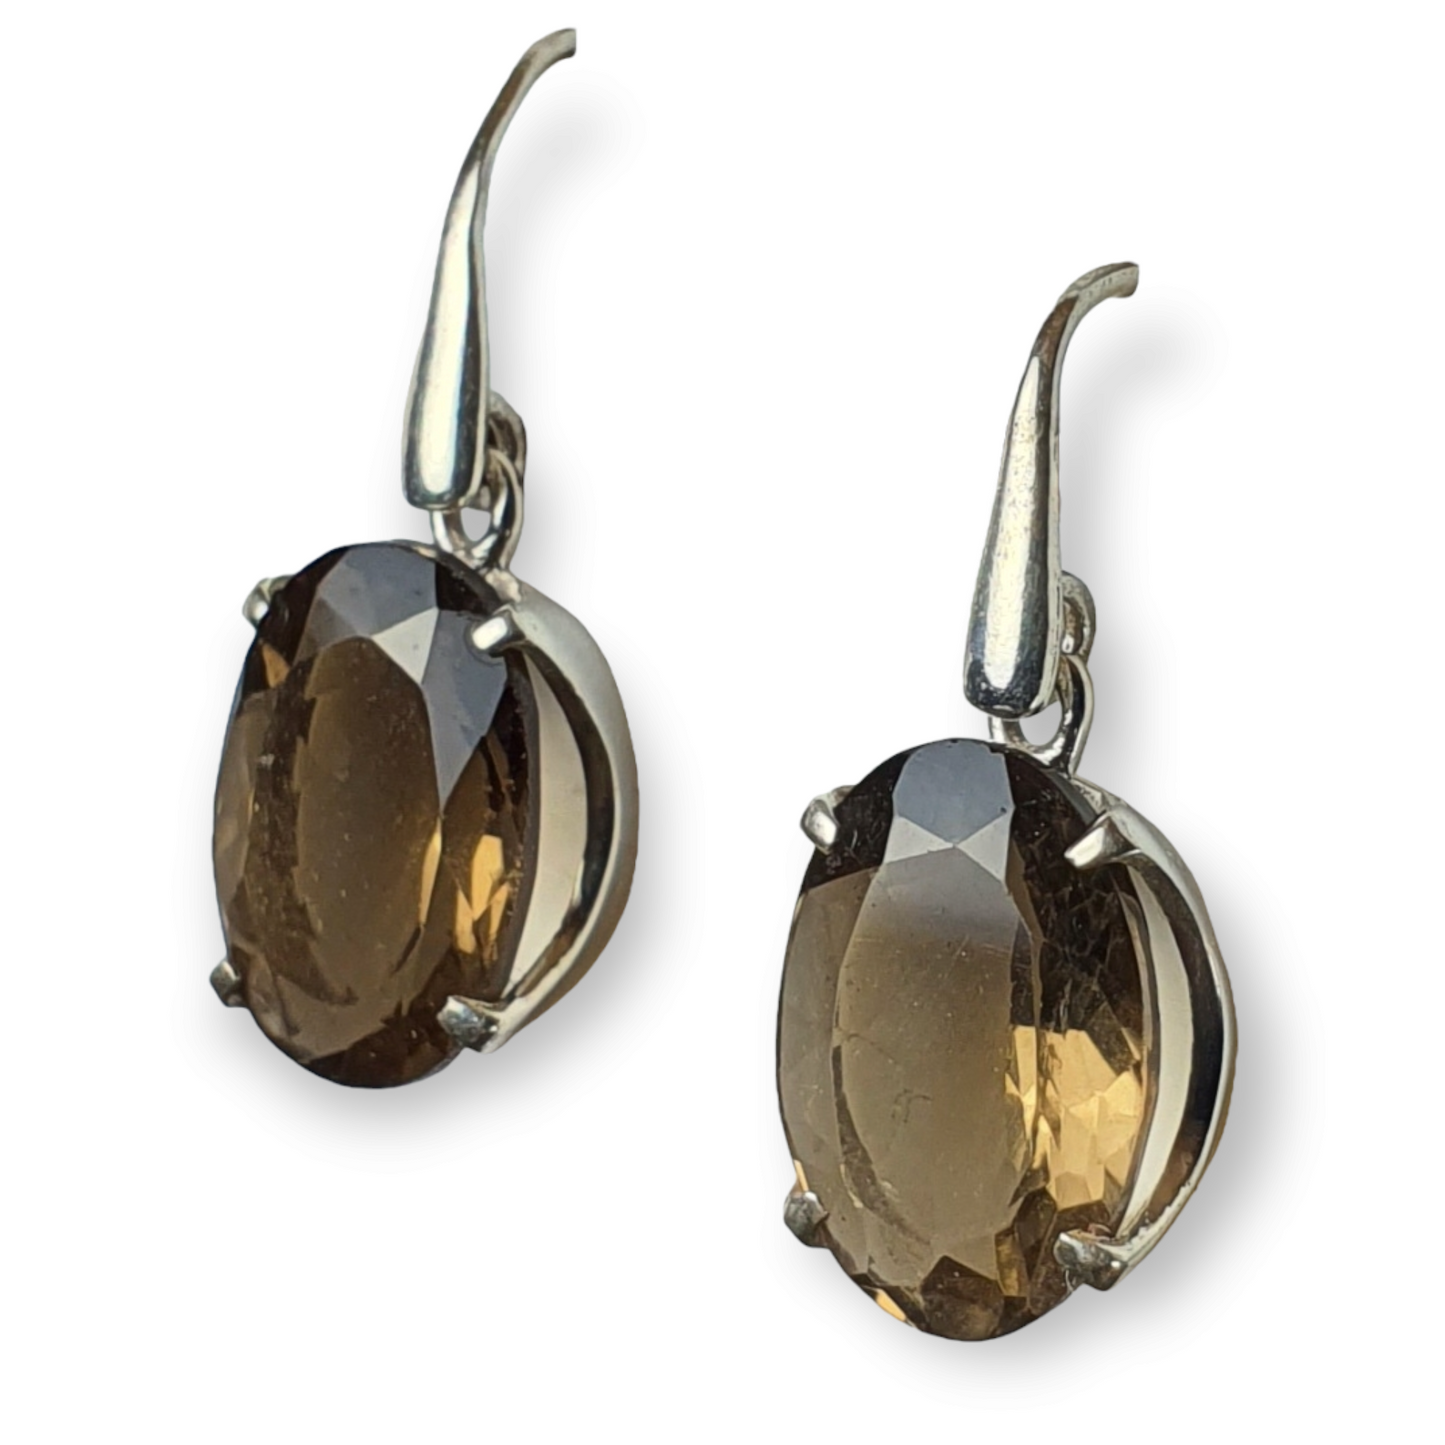 Crystals - Smoky Quartz Faceted Oval Drop/Hook Earrings - Sterling Silver